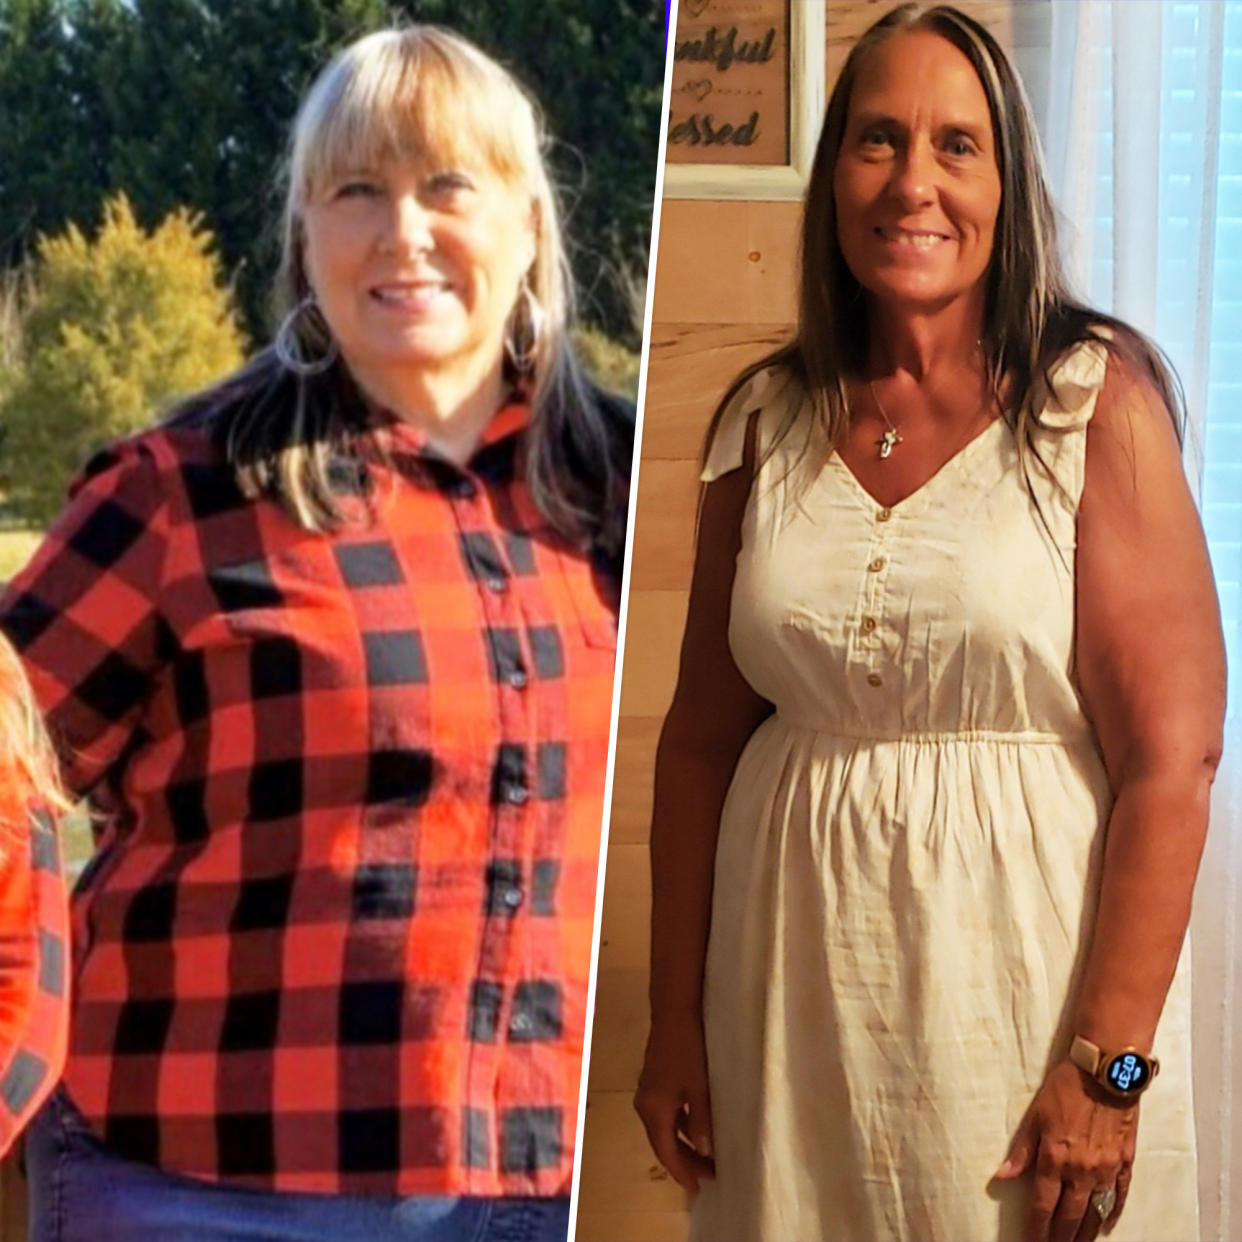 Gina buck lost 92 pounds in 8 months. (Courtesy Gina Buck)